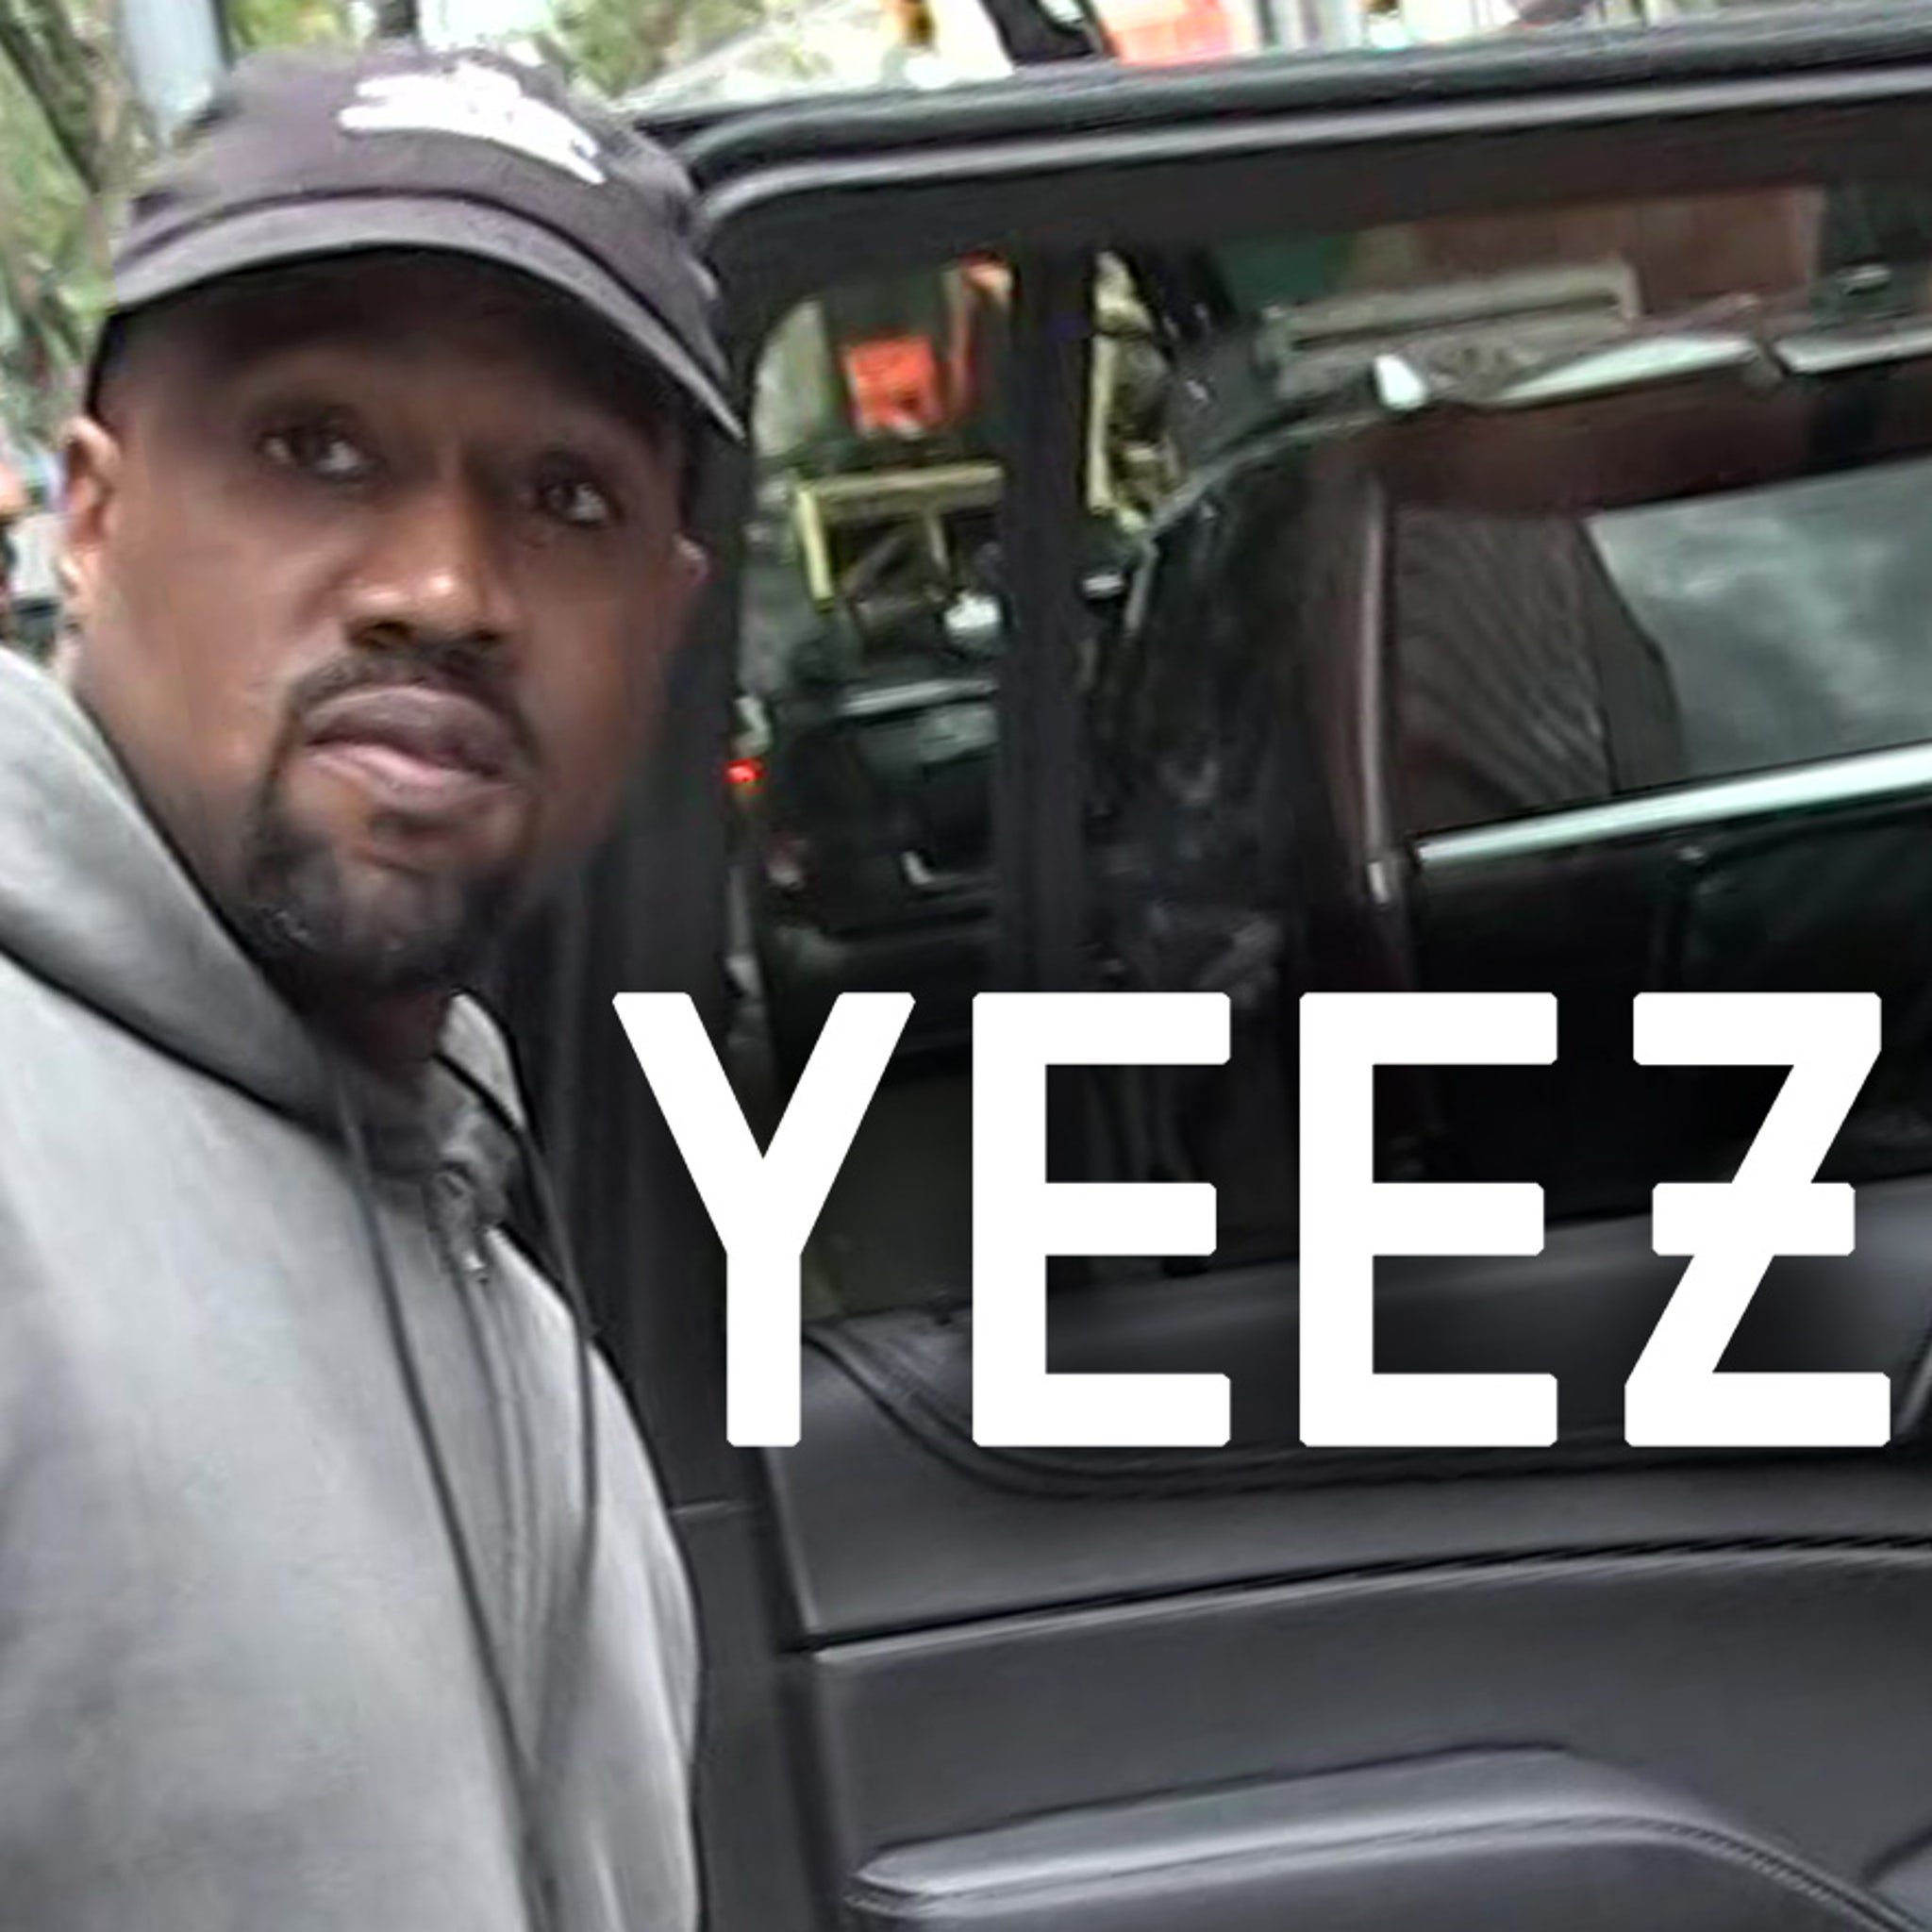 How Kanye West's Yeezy Boost Mayhem Has Changed The Resale Market